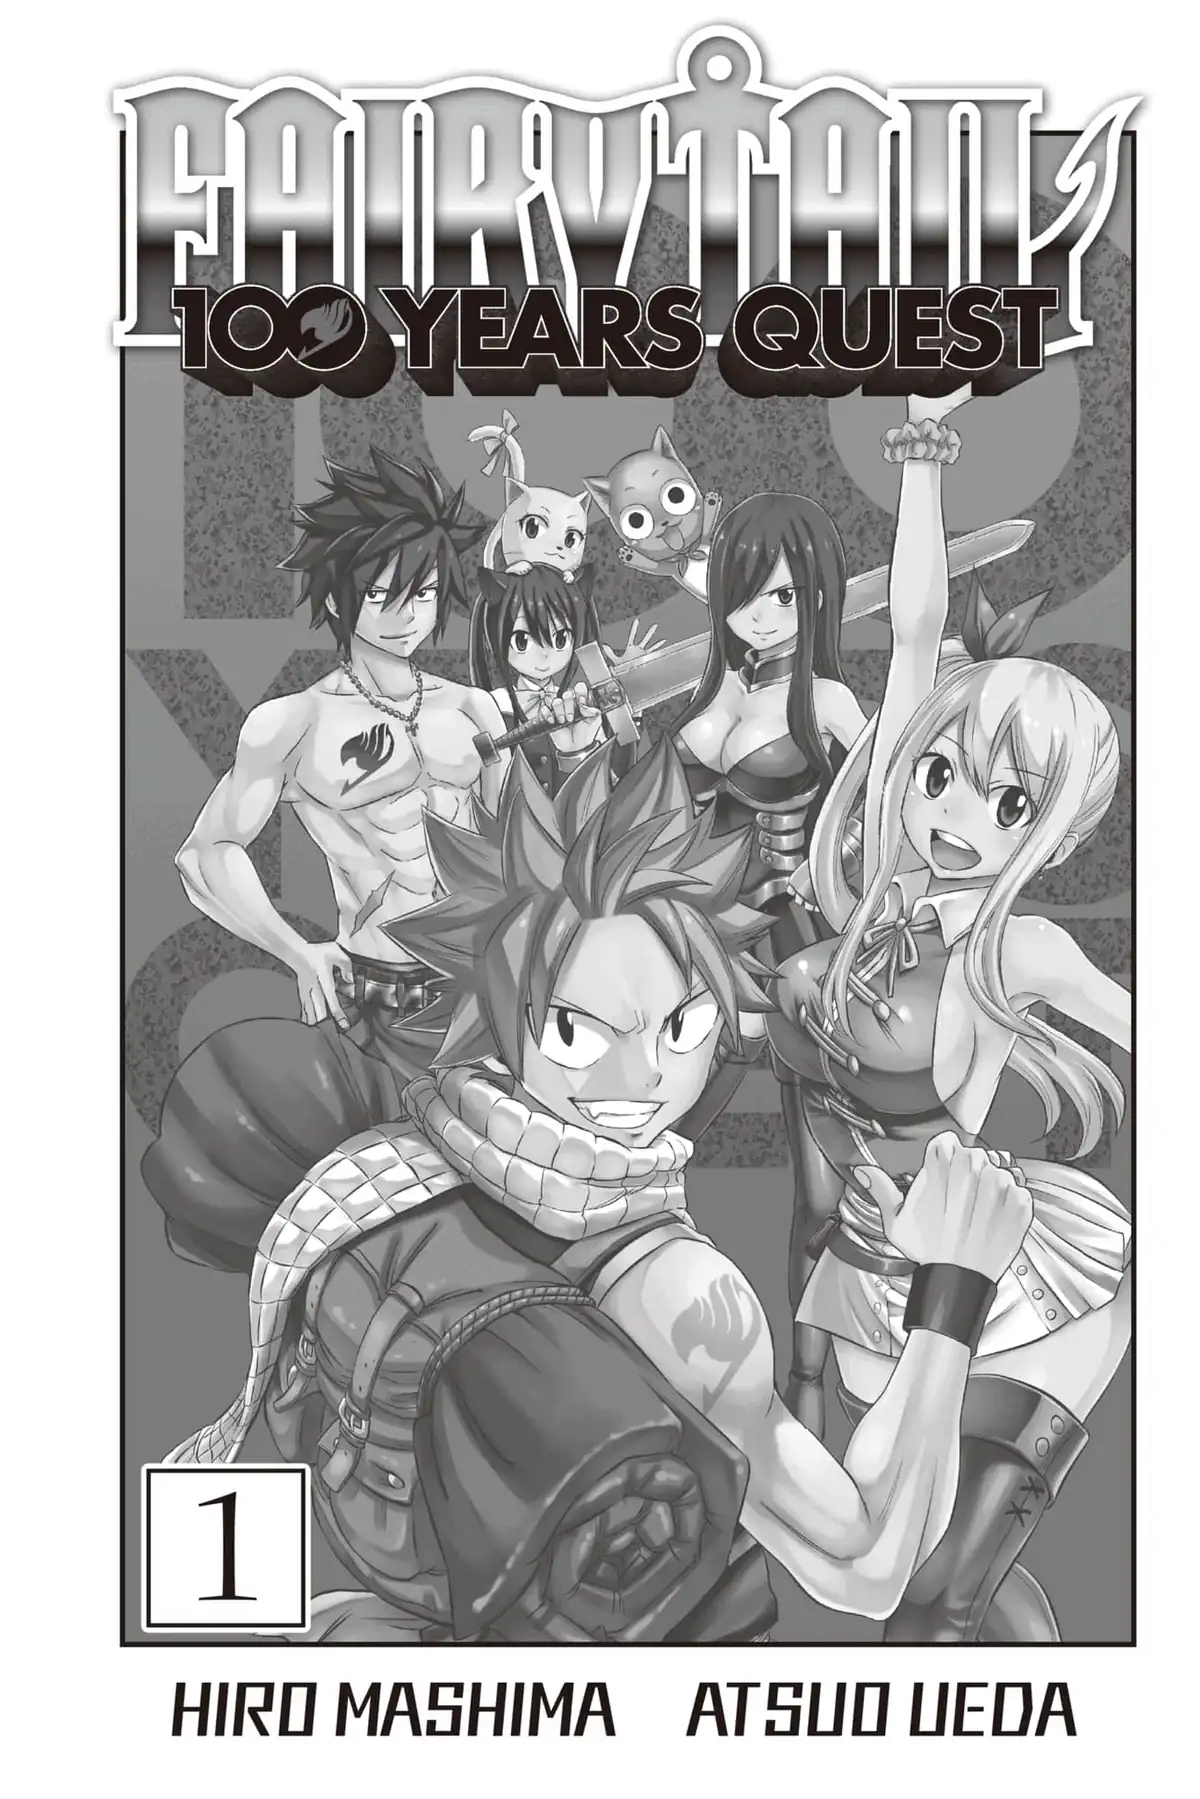 Read Fairy Tail: 100 Years Quest Manga in English Free Online